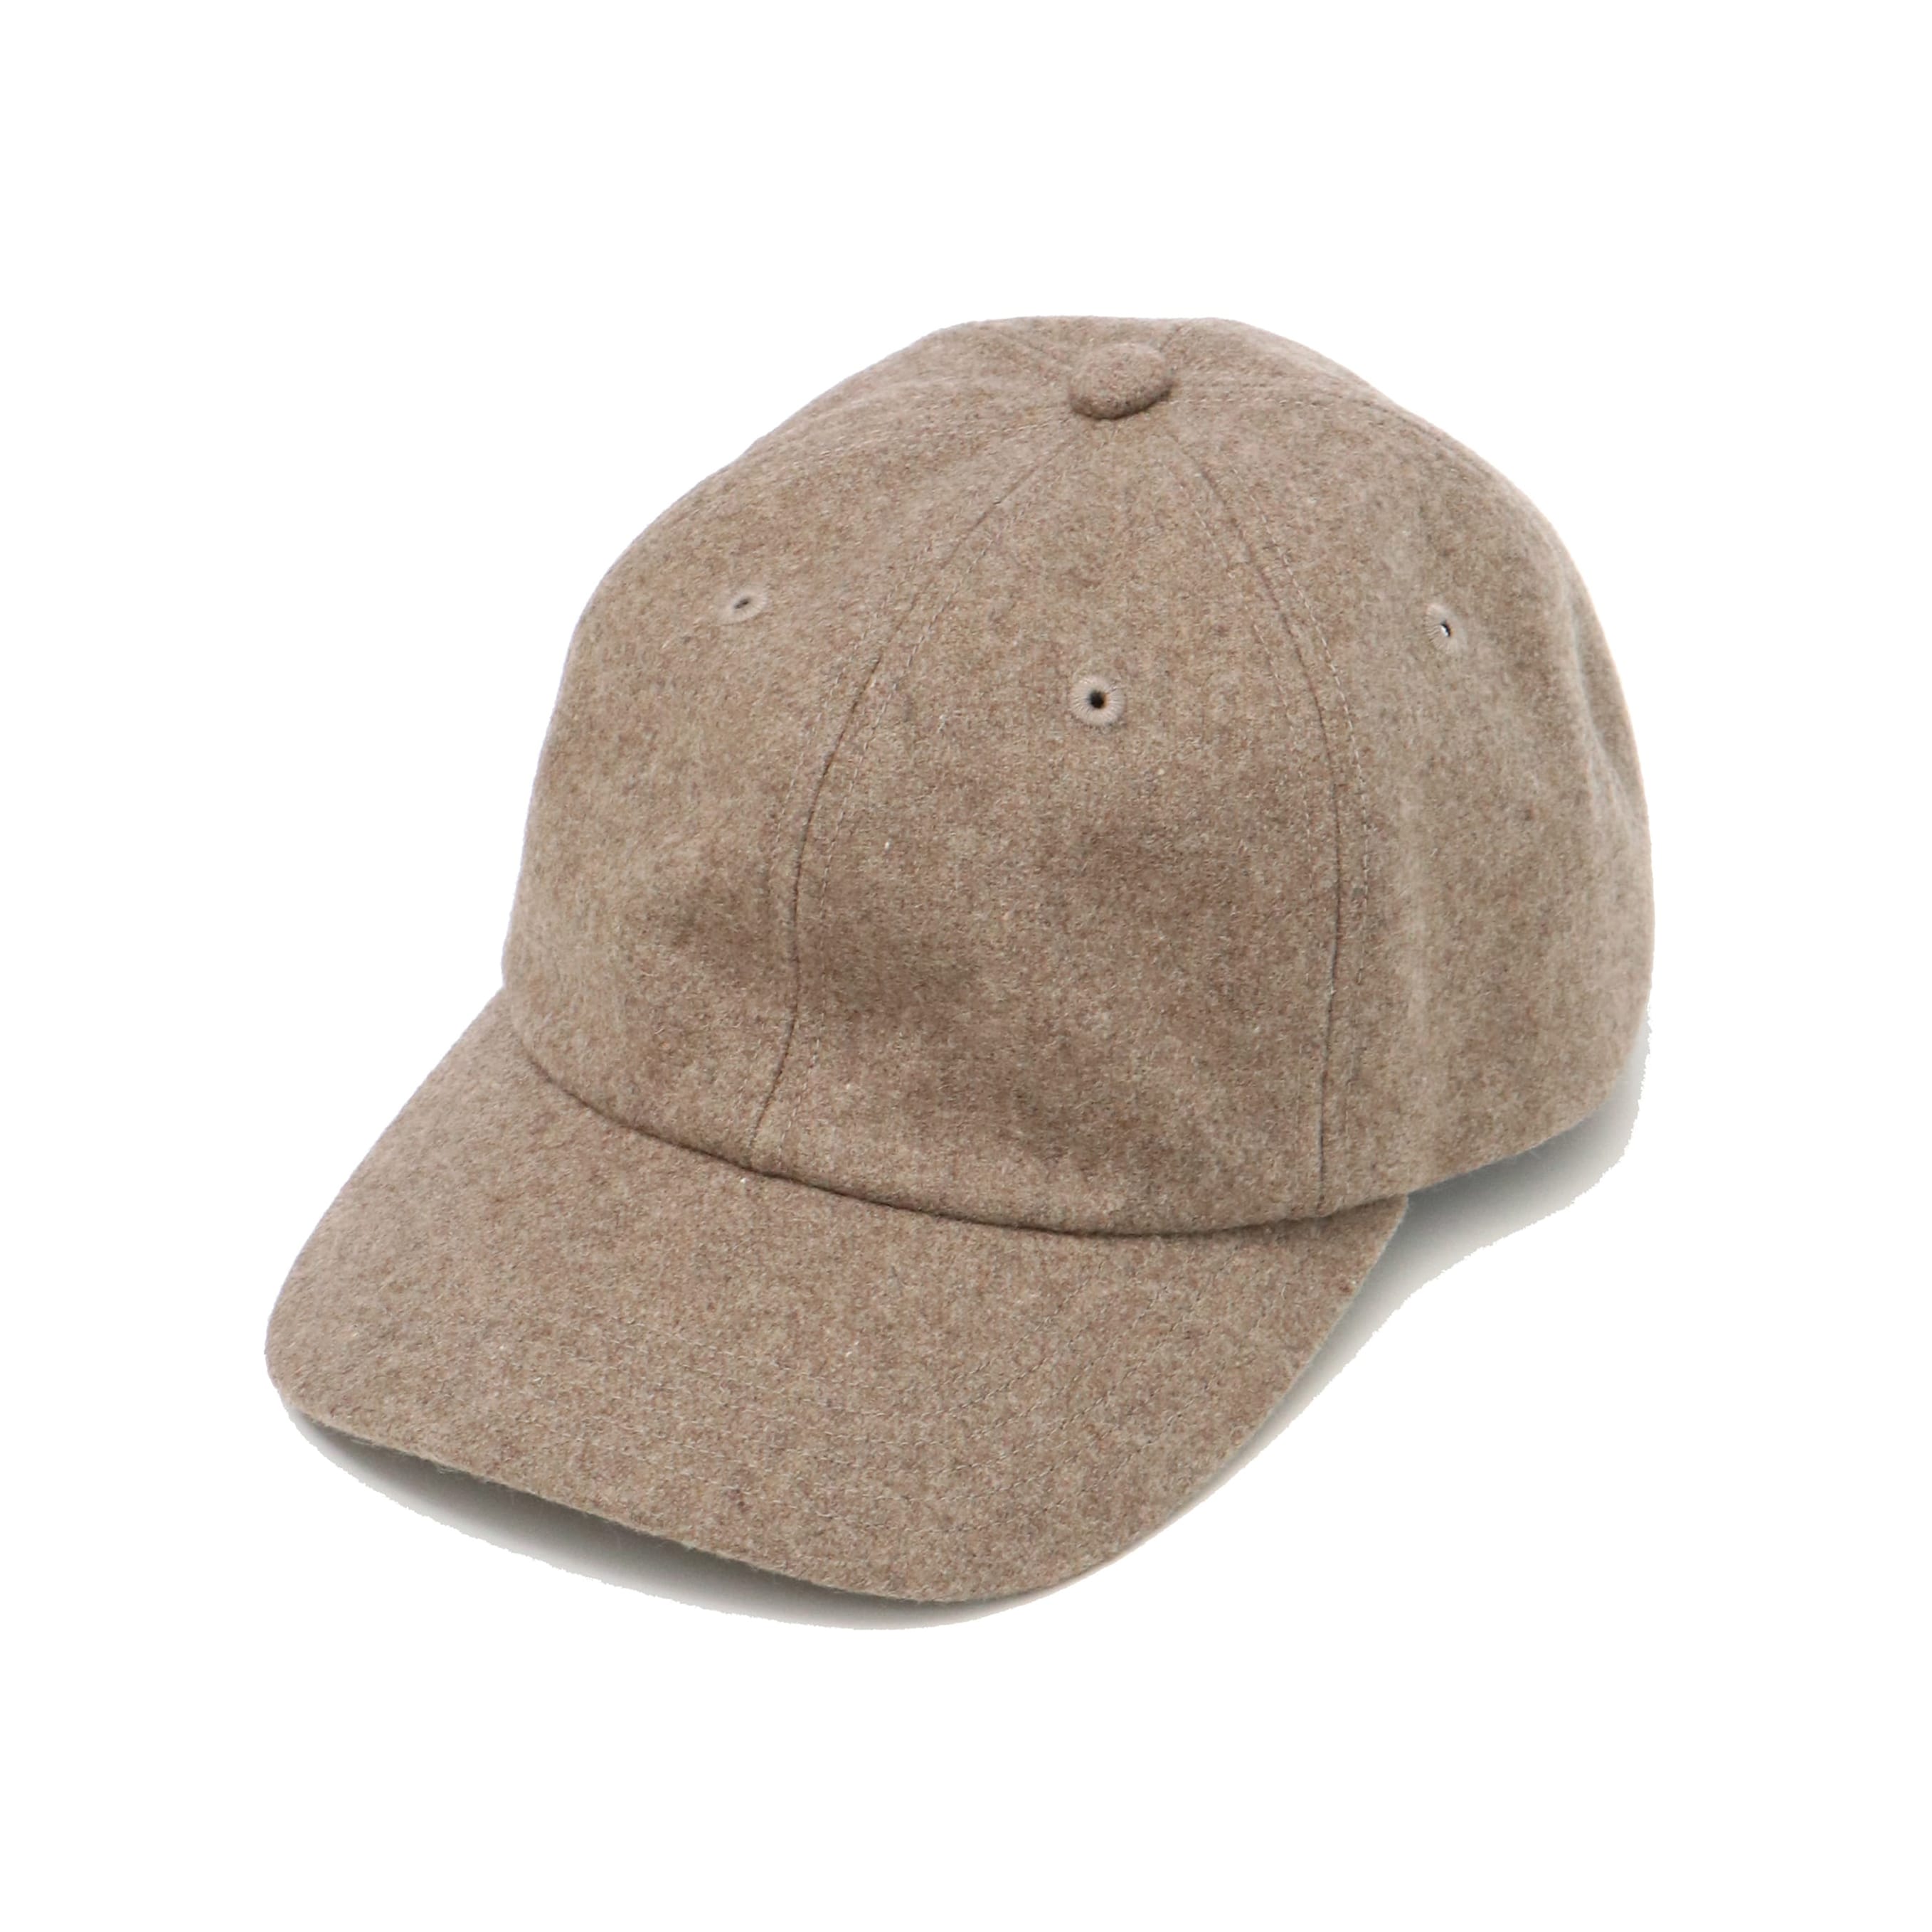 MELTON 6 PANEL CAP L.BROWN – TIME AFTER TIME